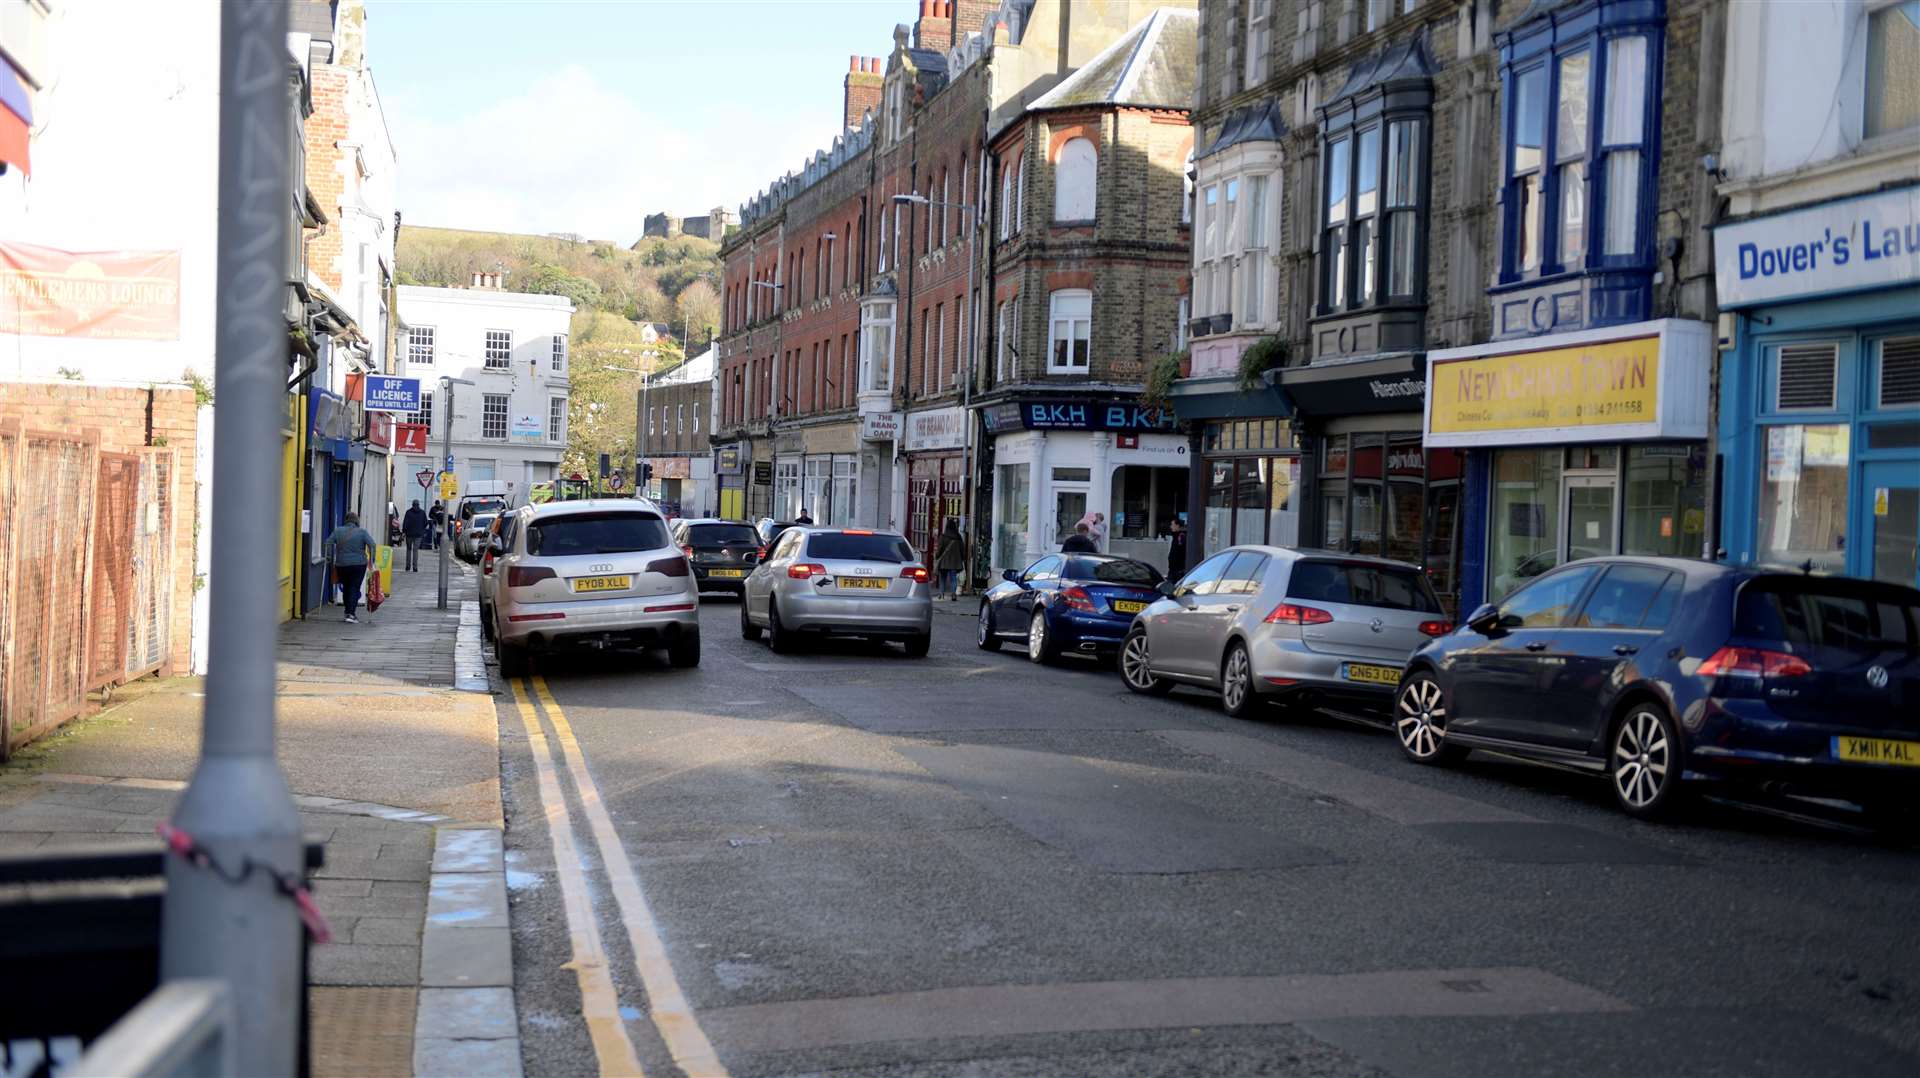 Changes are also proposed for Worthington Street. Picture: Barry Goodwin